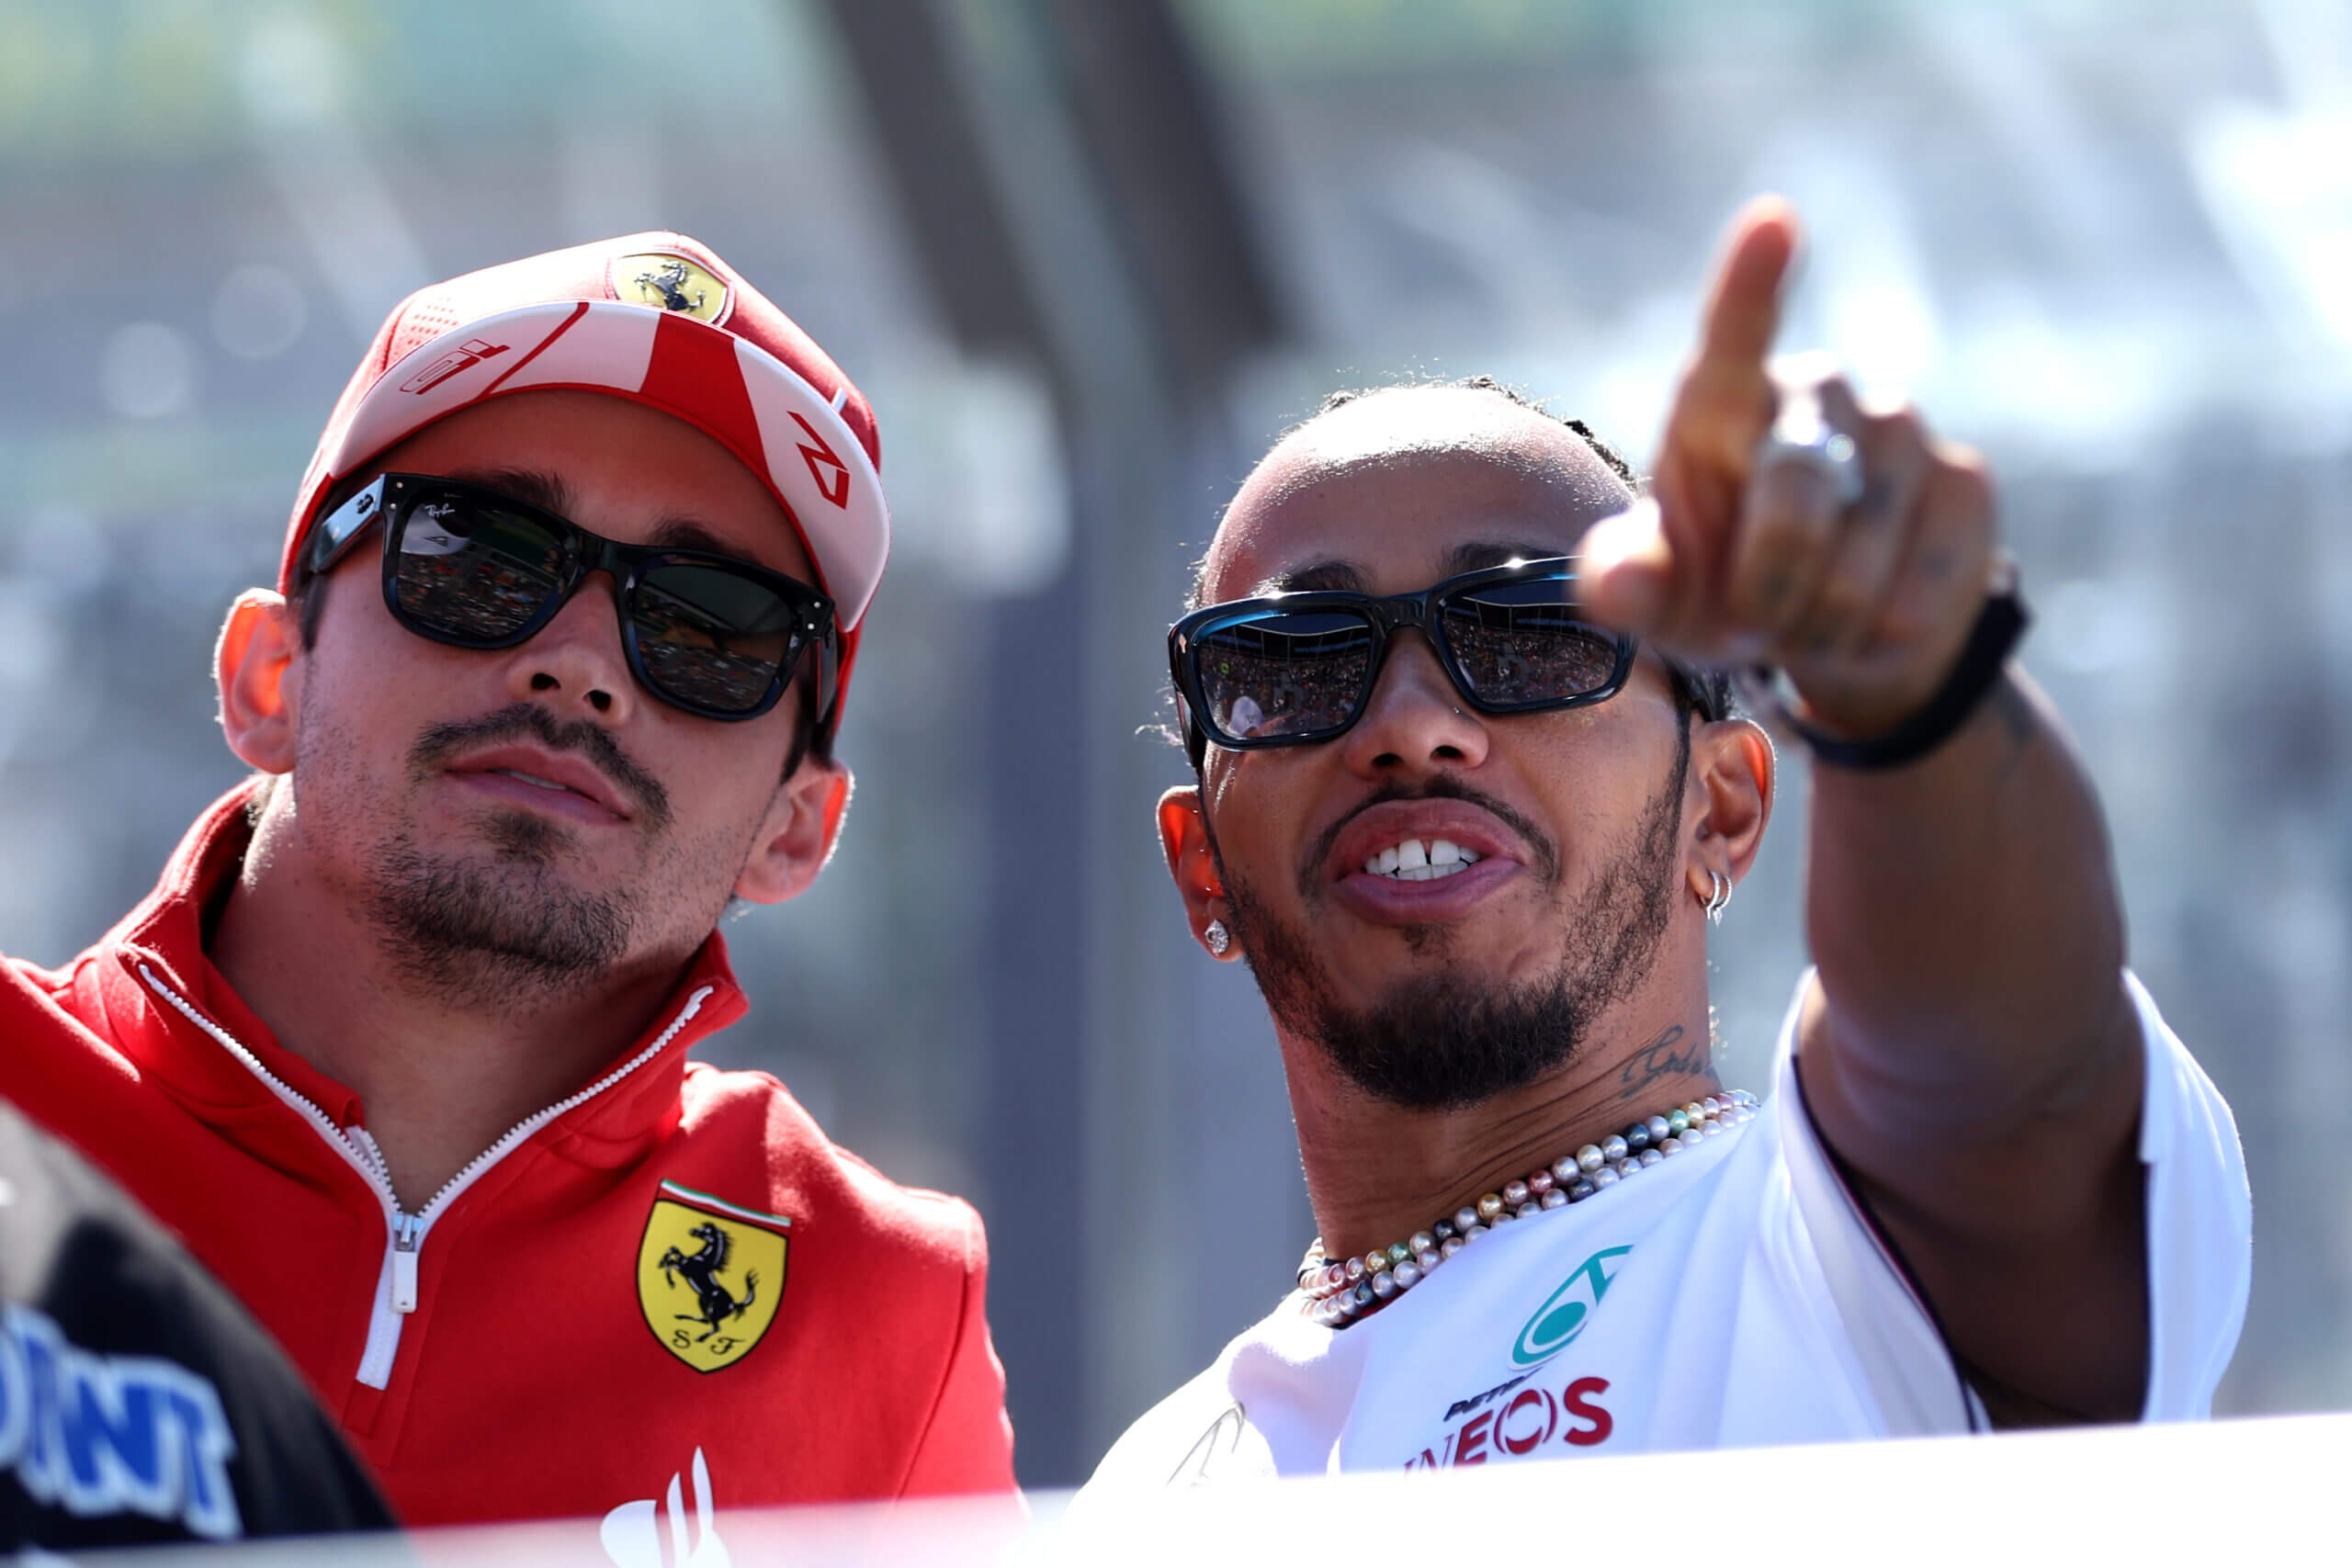 Signing Hamilton is just the start of Ferrari’s push to return to F1 glory